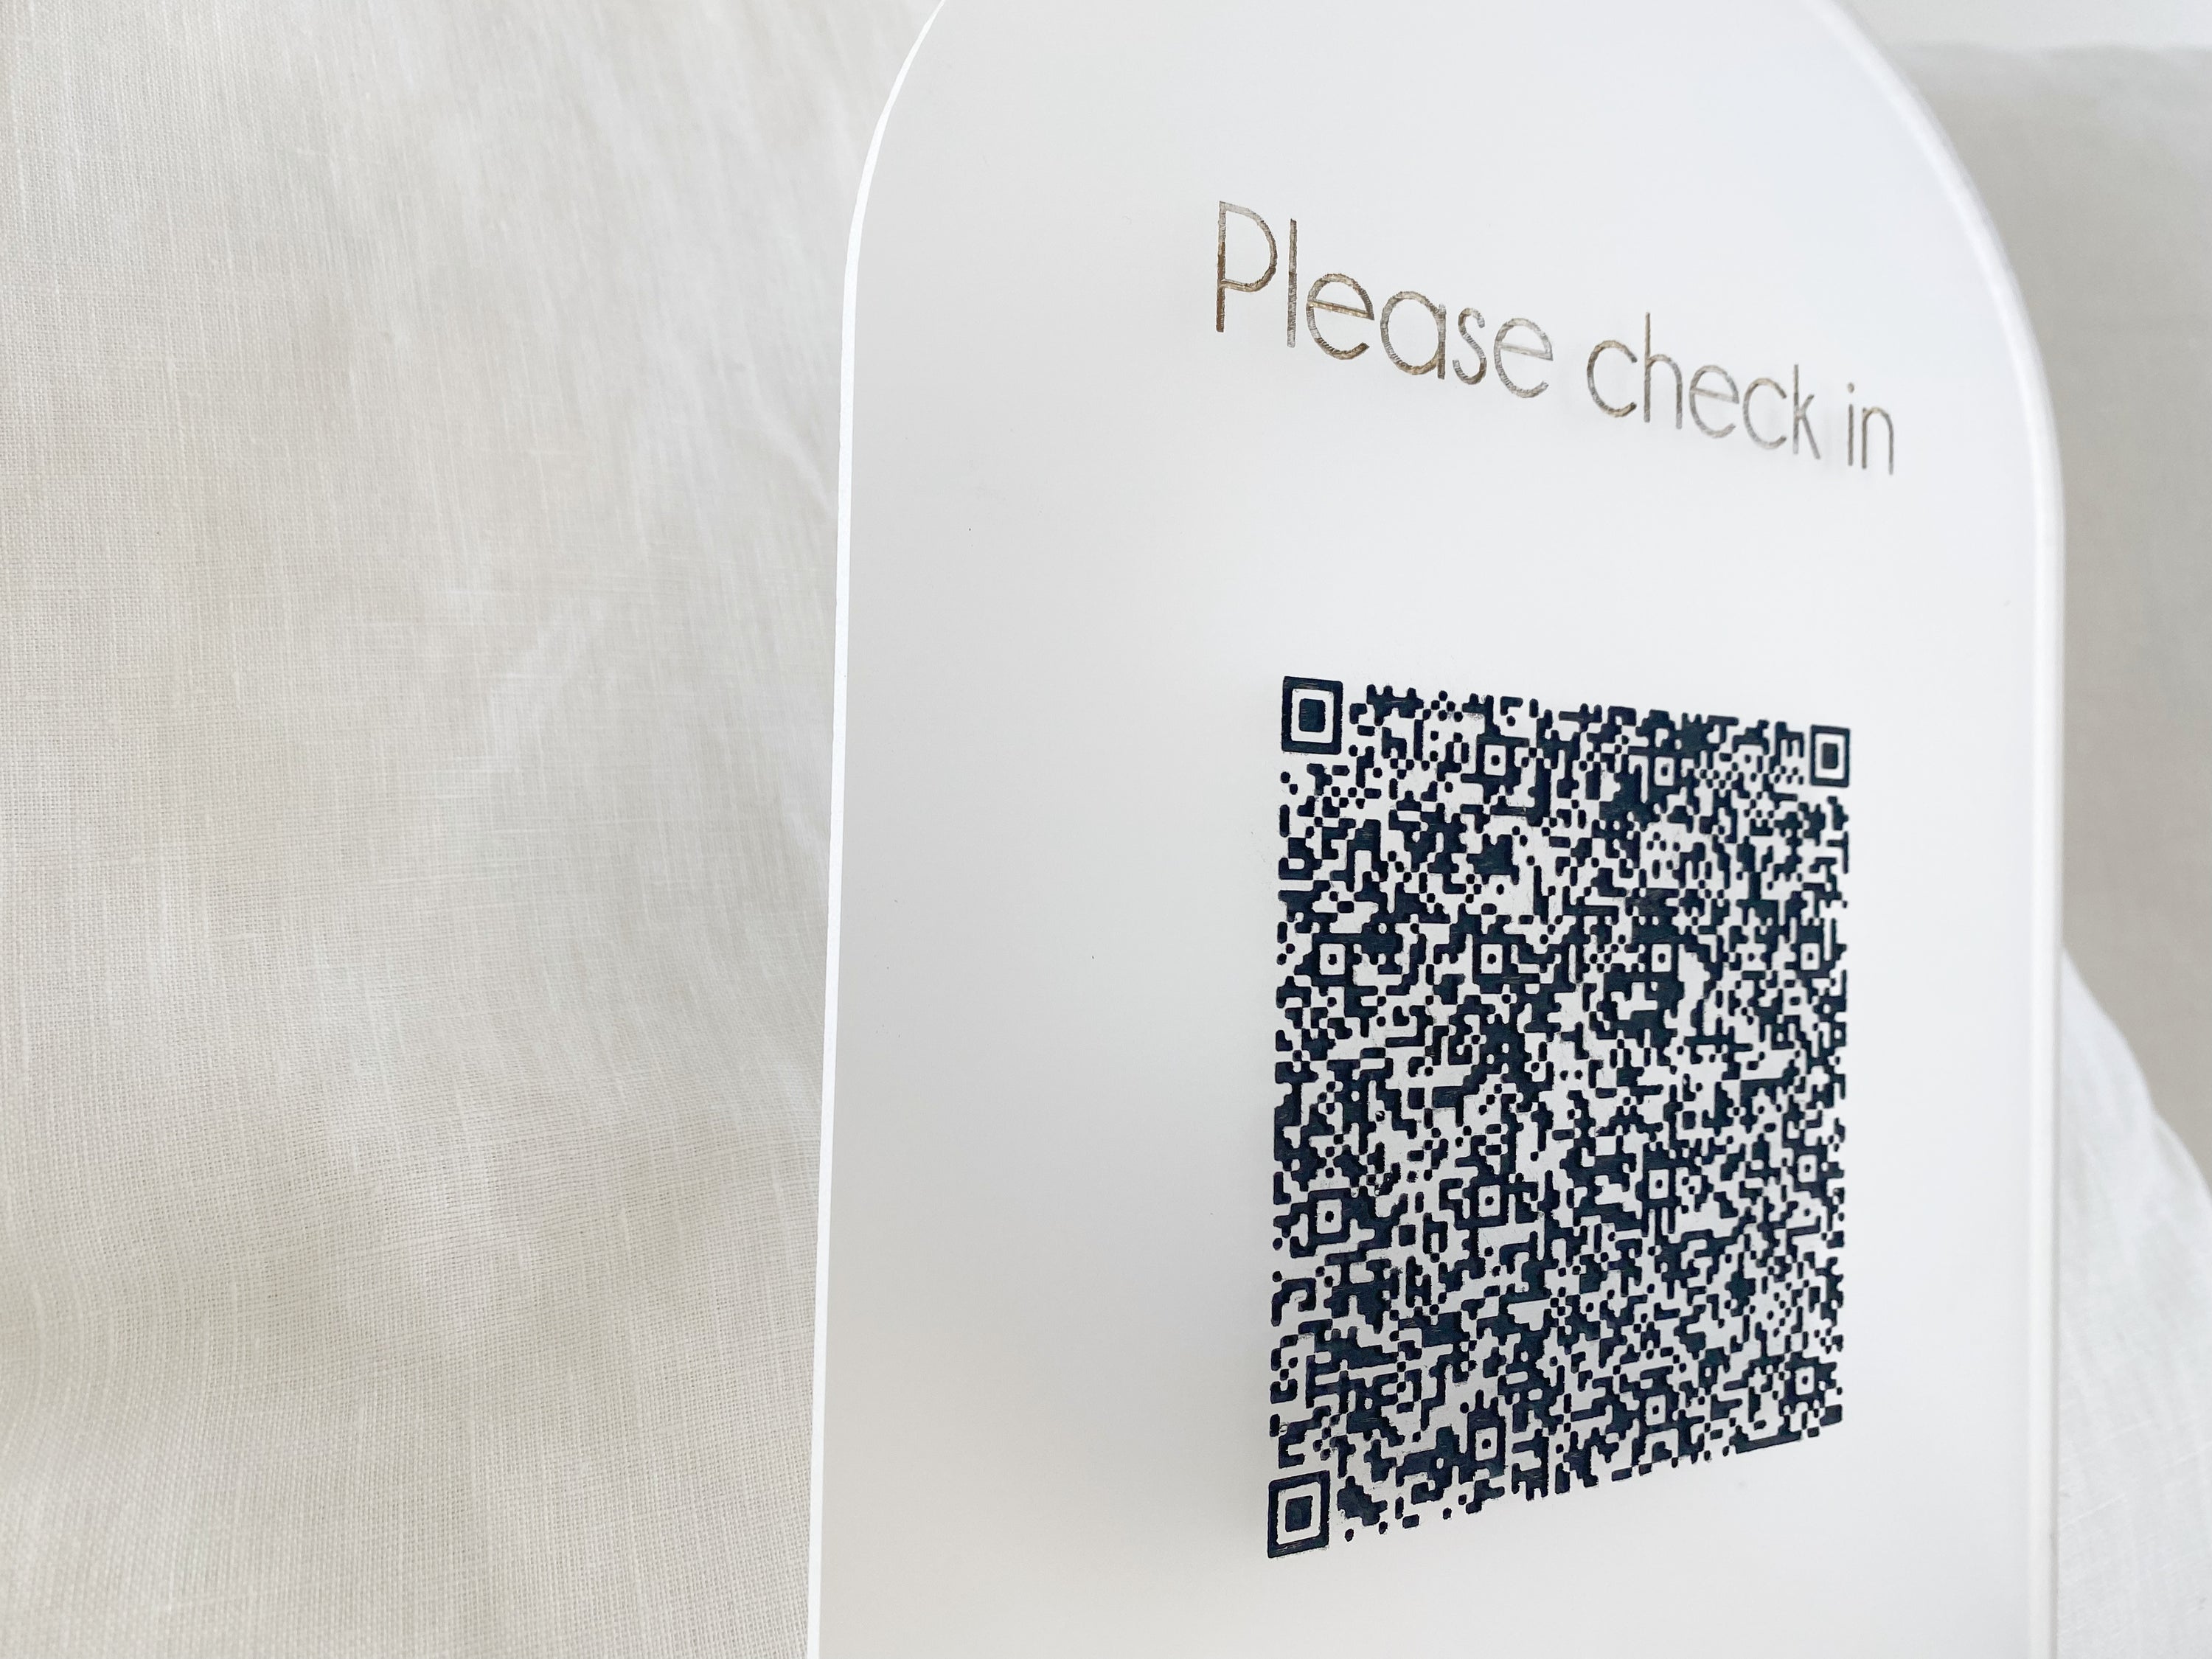 QR code check in sign